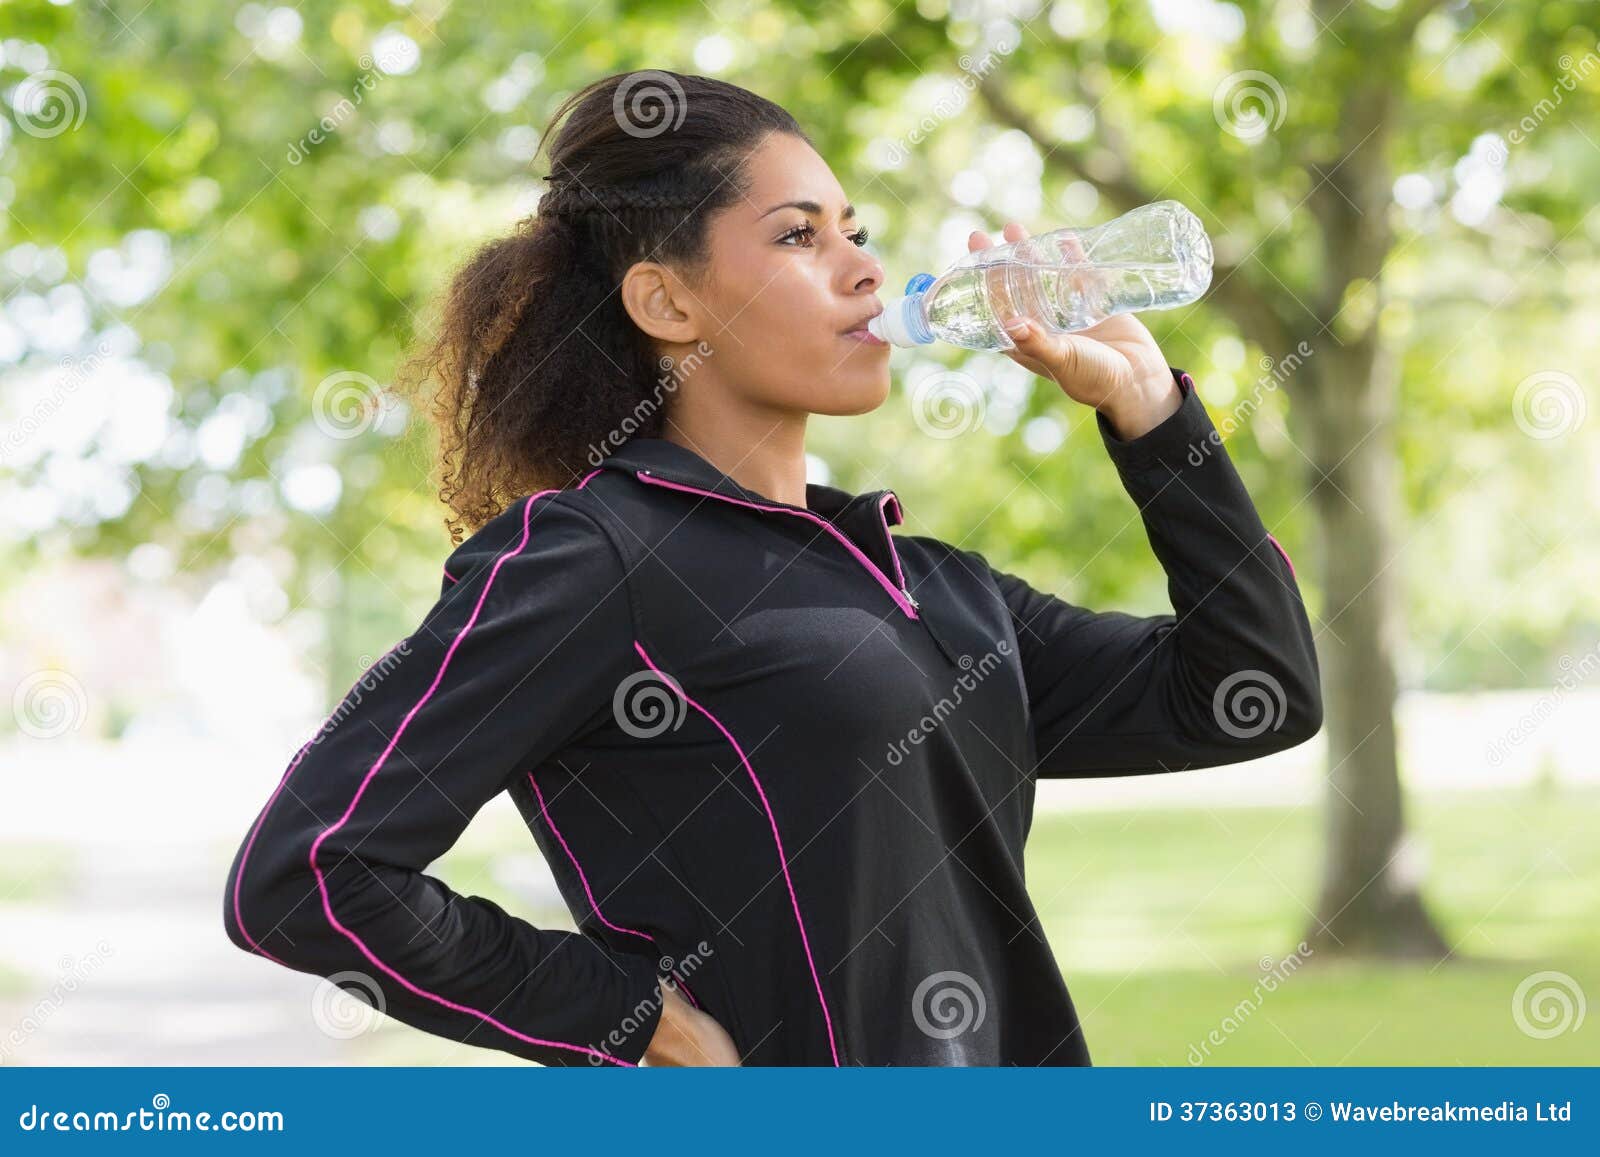 Tired Healthy Woman Drinking Water in the Park Stock Image - Image of ...